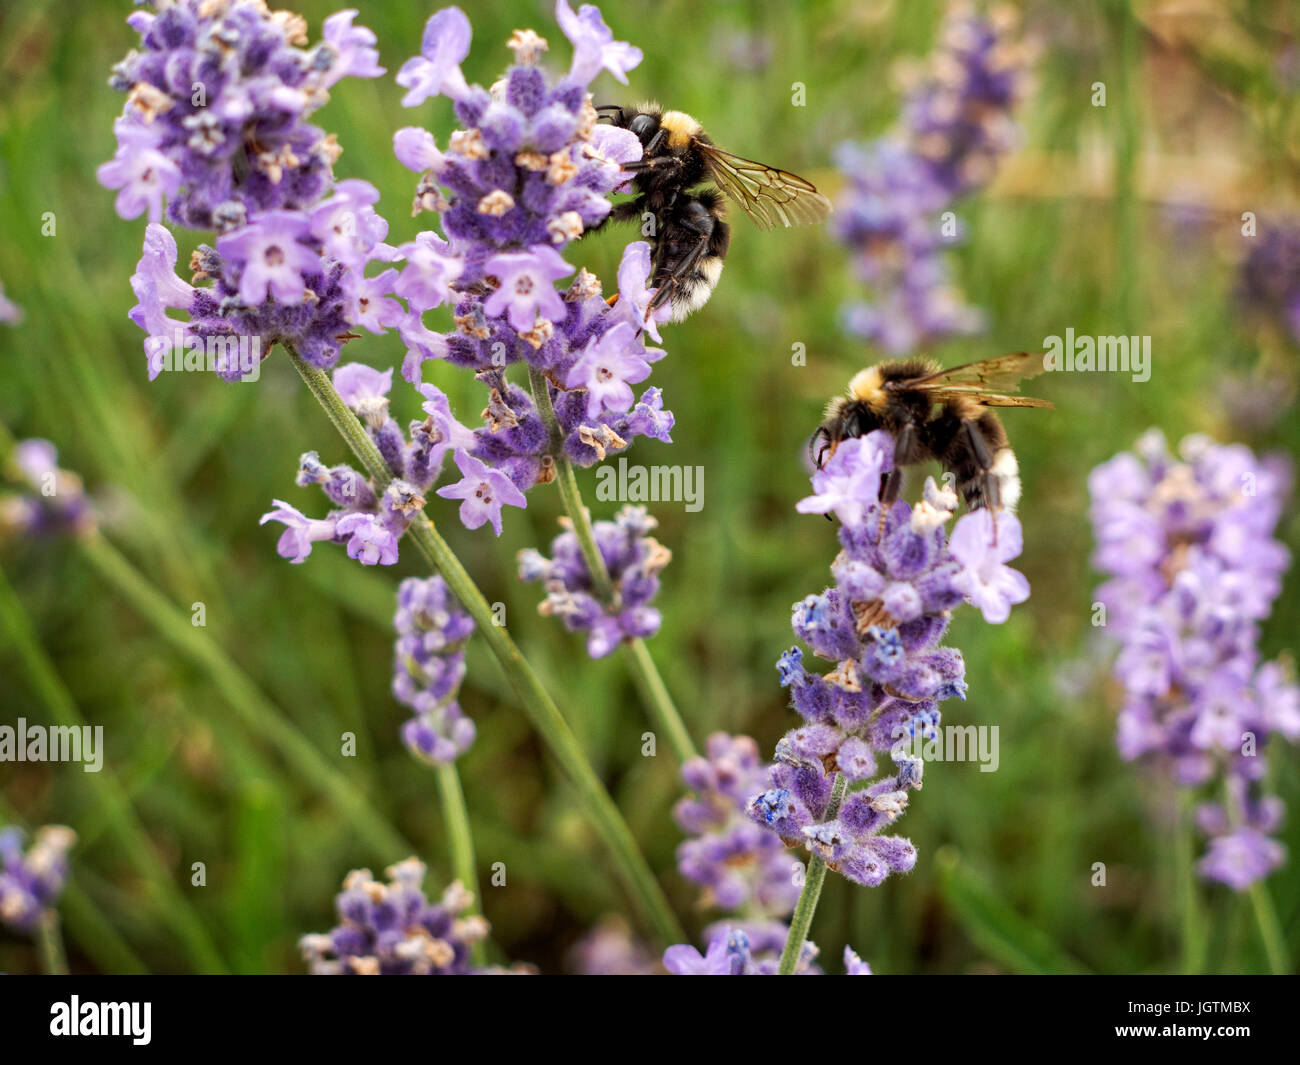 Bumble Bees feeding on lavender blooms Stock Photo